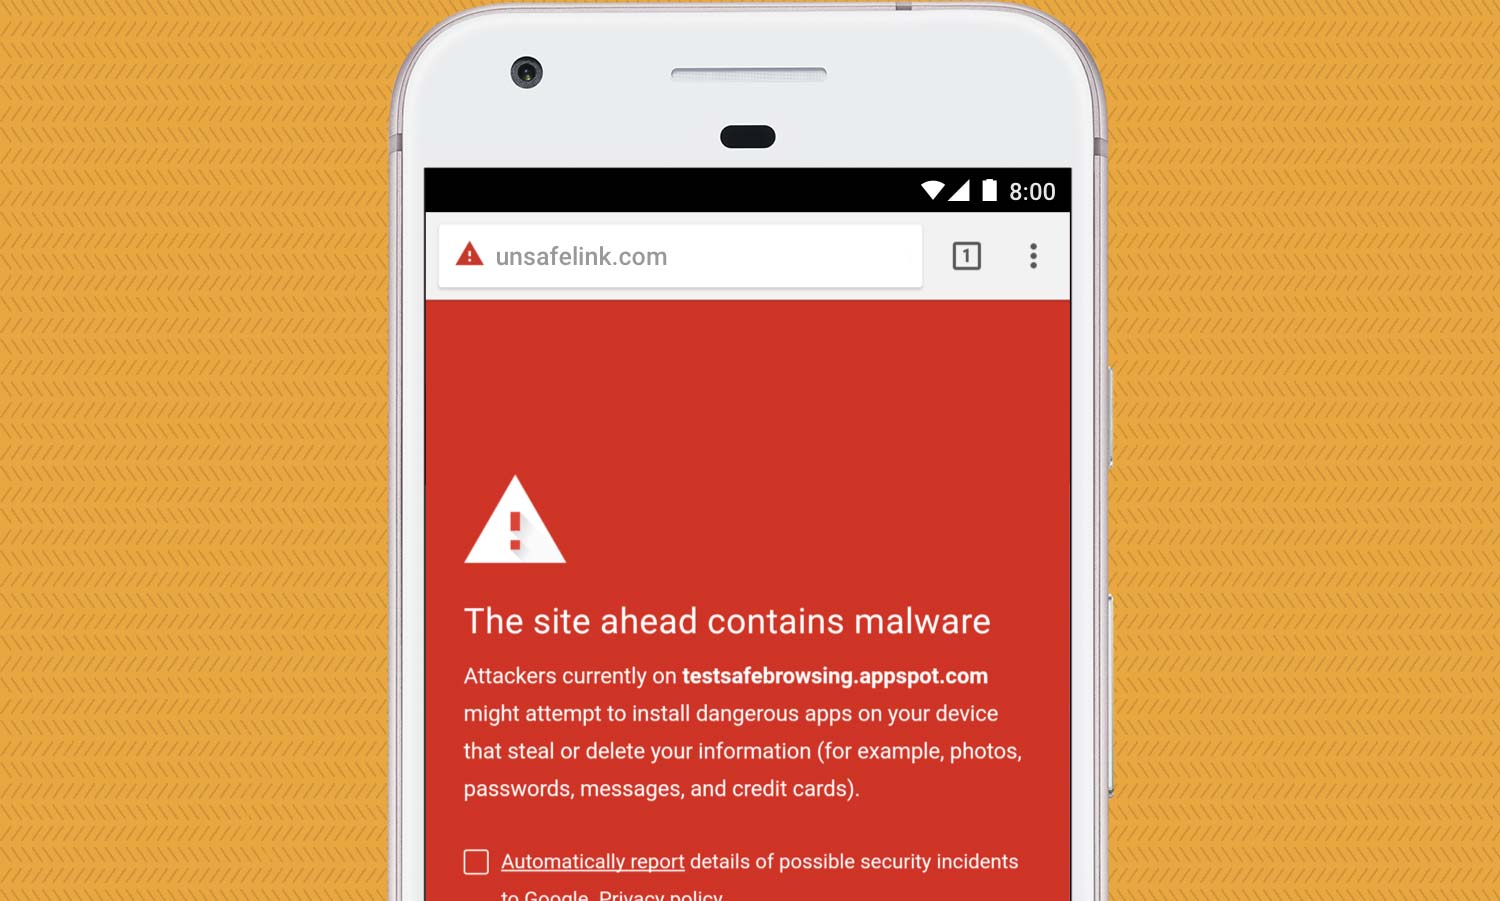 IKARUS mobile.security - Apps on Google Play